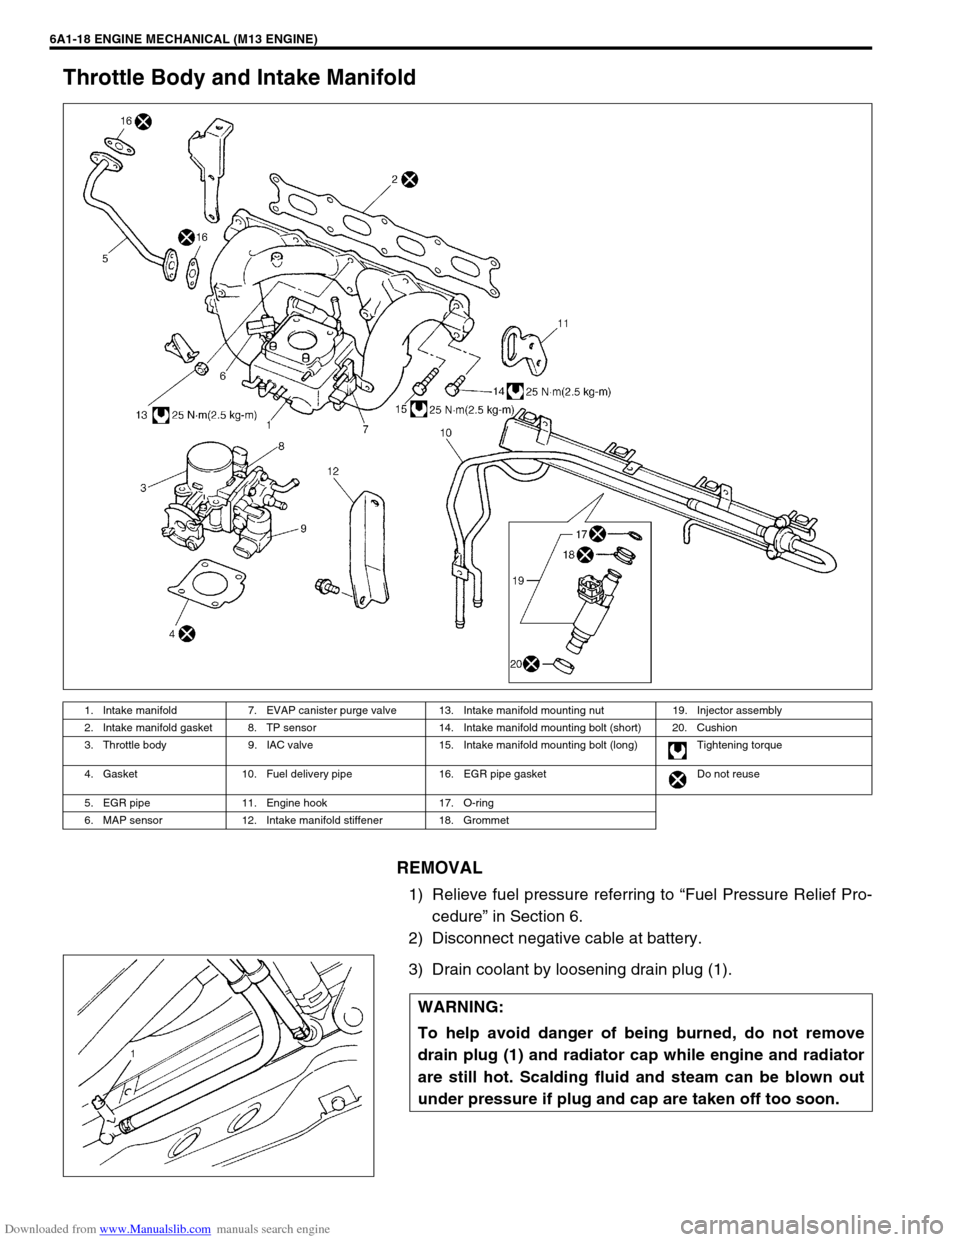 SUZUKI JIMNY 2005 3.G Service User Guide Downloaded from www.Manualslib.com manuals search engine 6A1-18 ENGINE MECHANICAL (M13 ENGINE)
Throttle Body and Intake Manifold
REMOVAL
1) Relieve fuel pressure referring to “Fuel Pressure Relief P